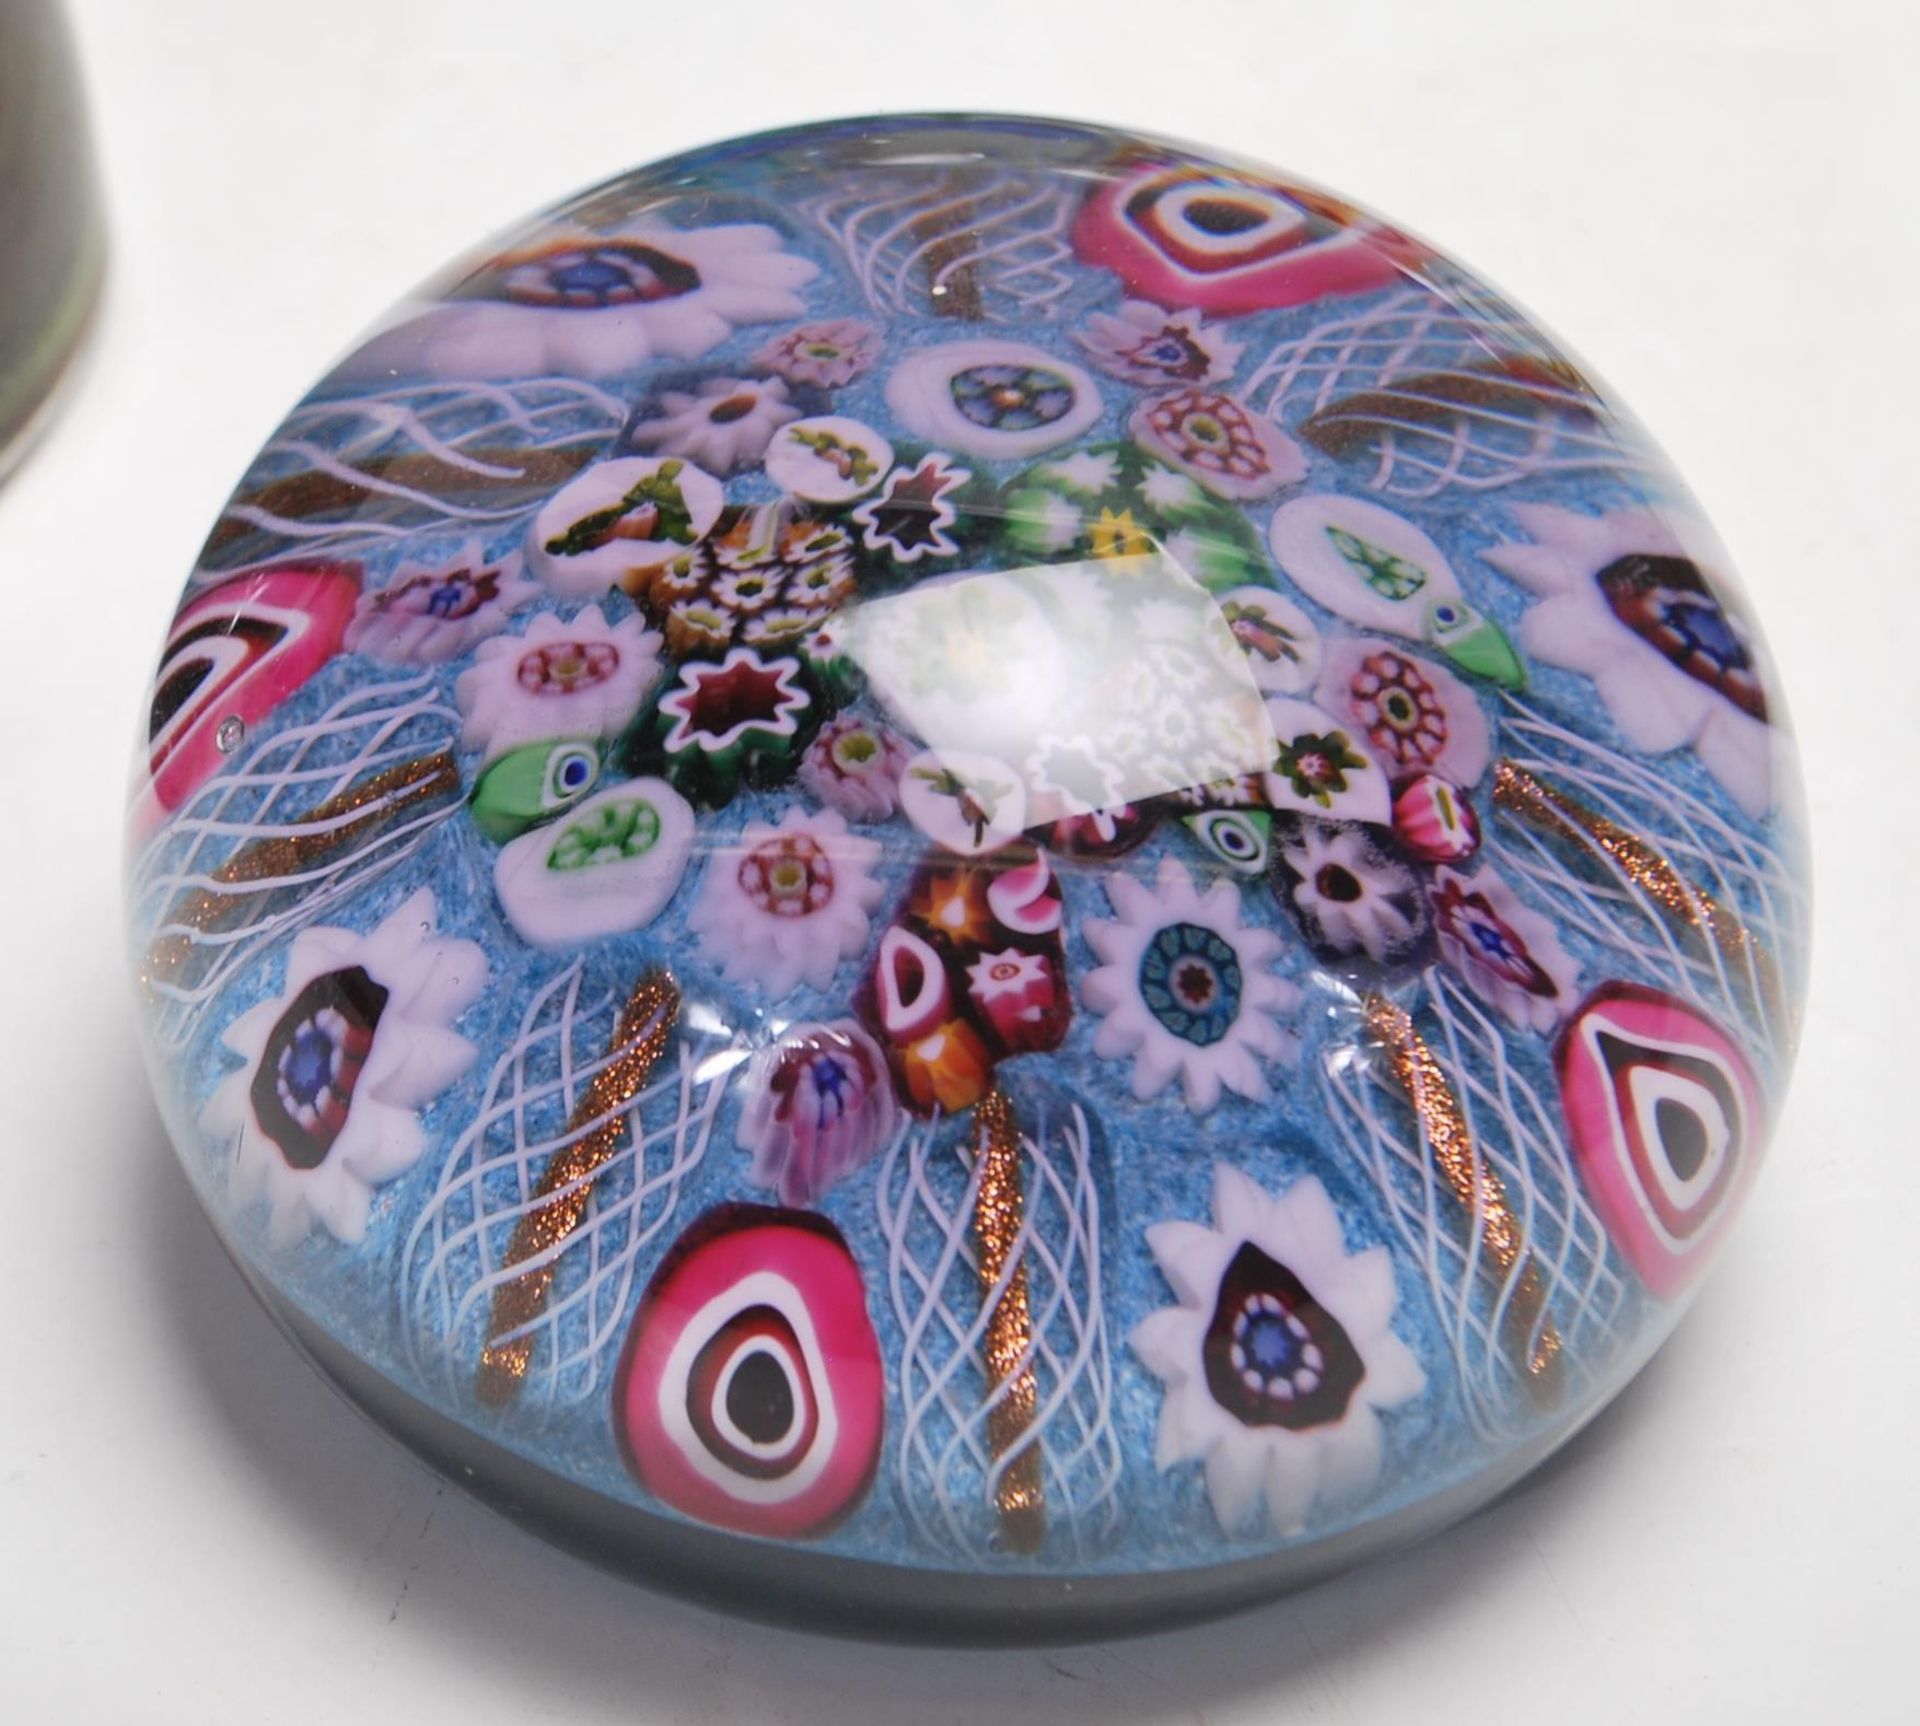 COLLECTION OF VINTAGE STUDIO ART GLASS PAPERWEIGHTS - Image 8 of 9